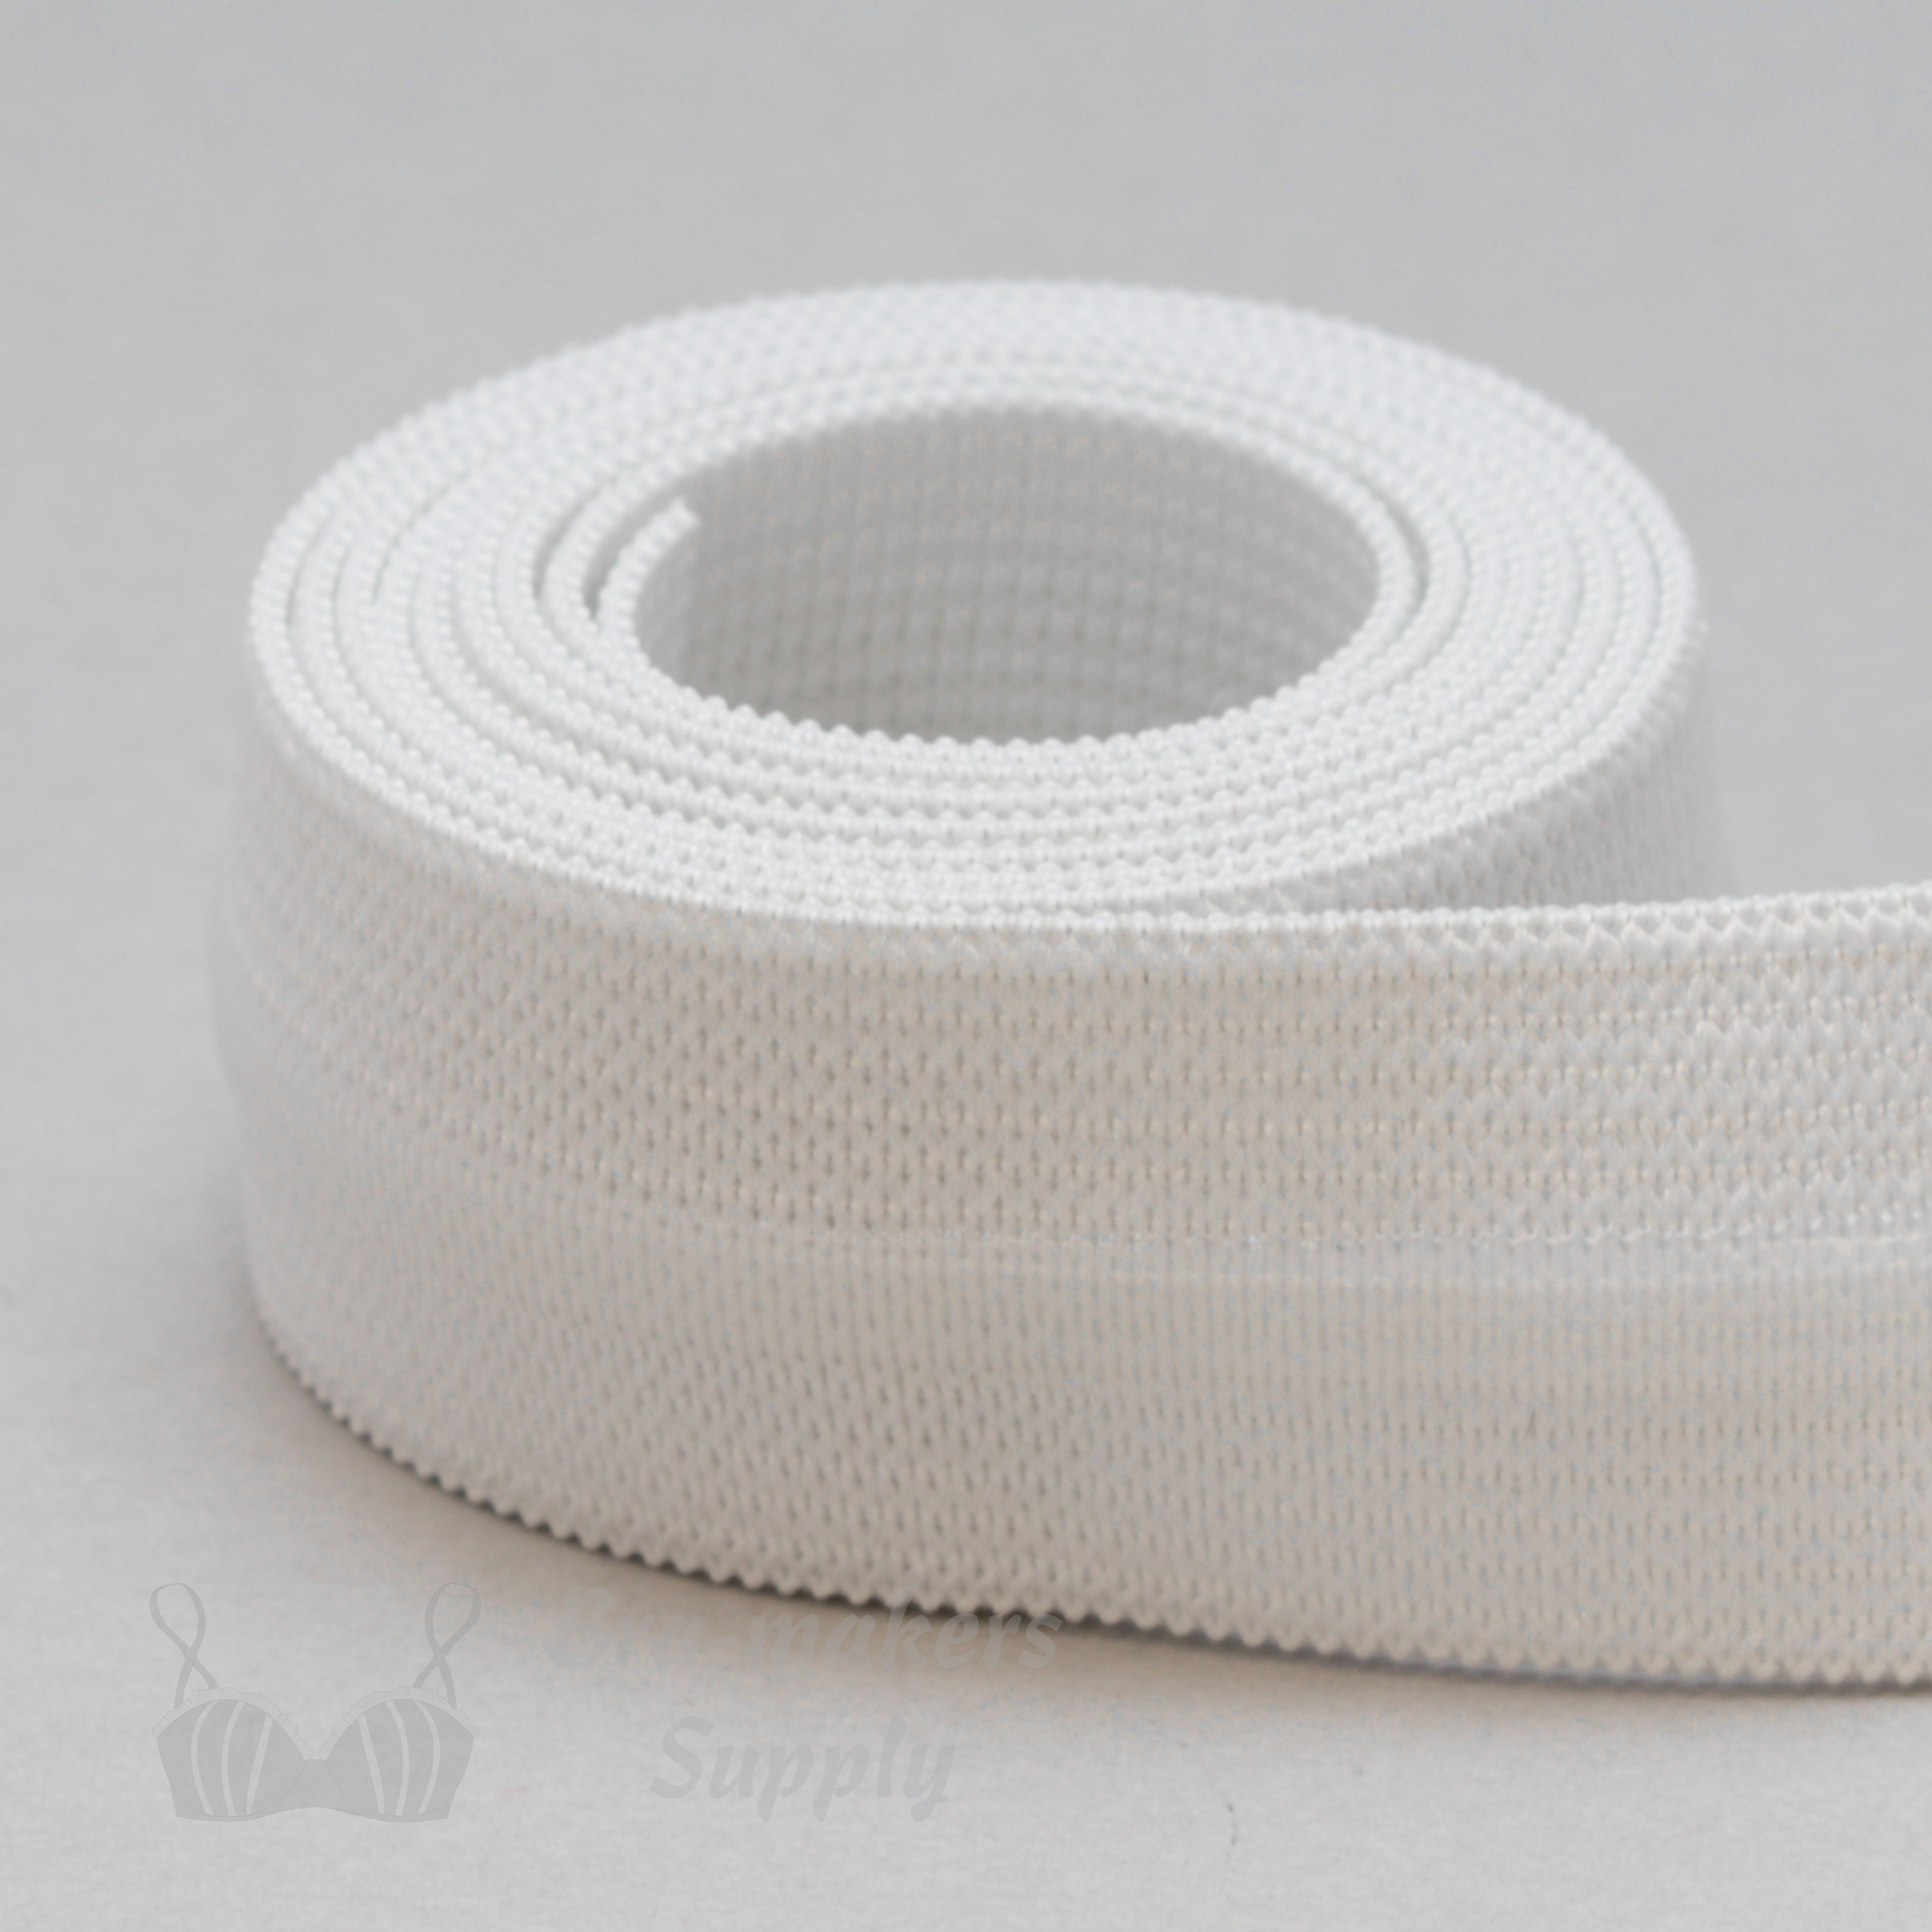 Bands Silicone Dress, Elastic Band Bra Sewing